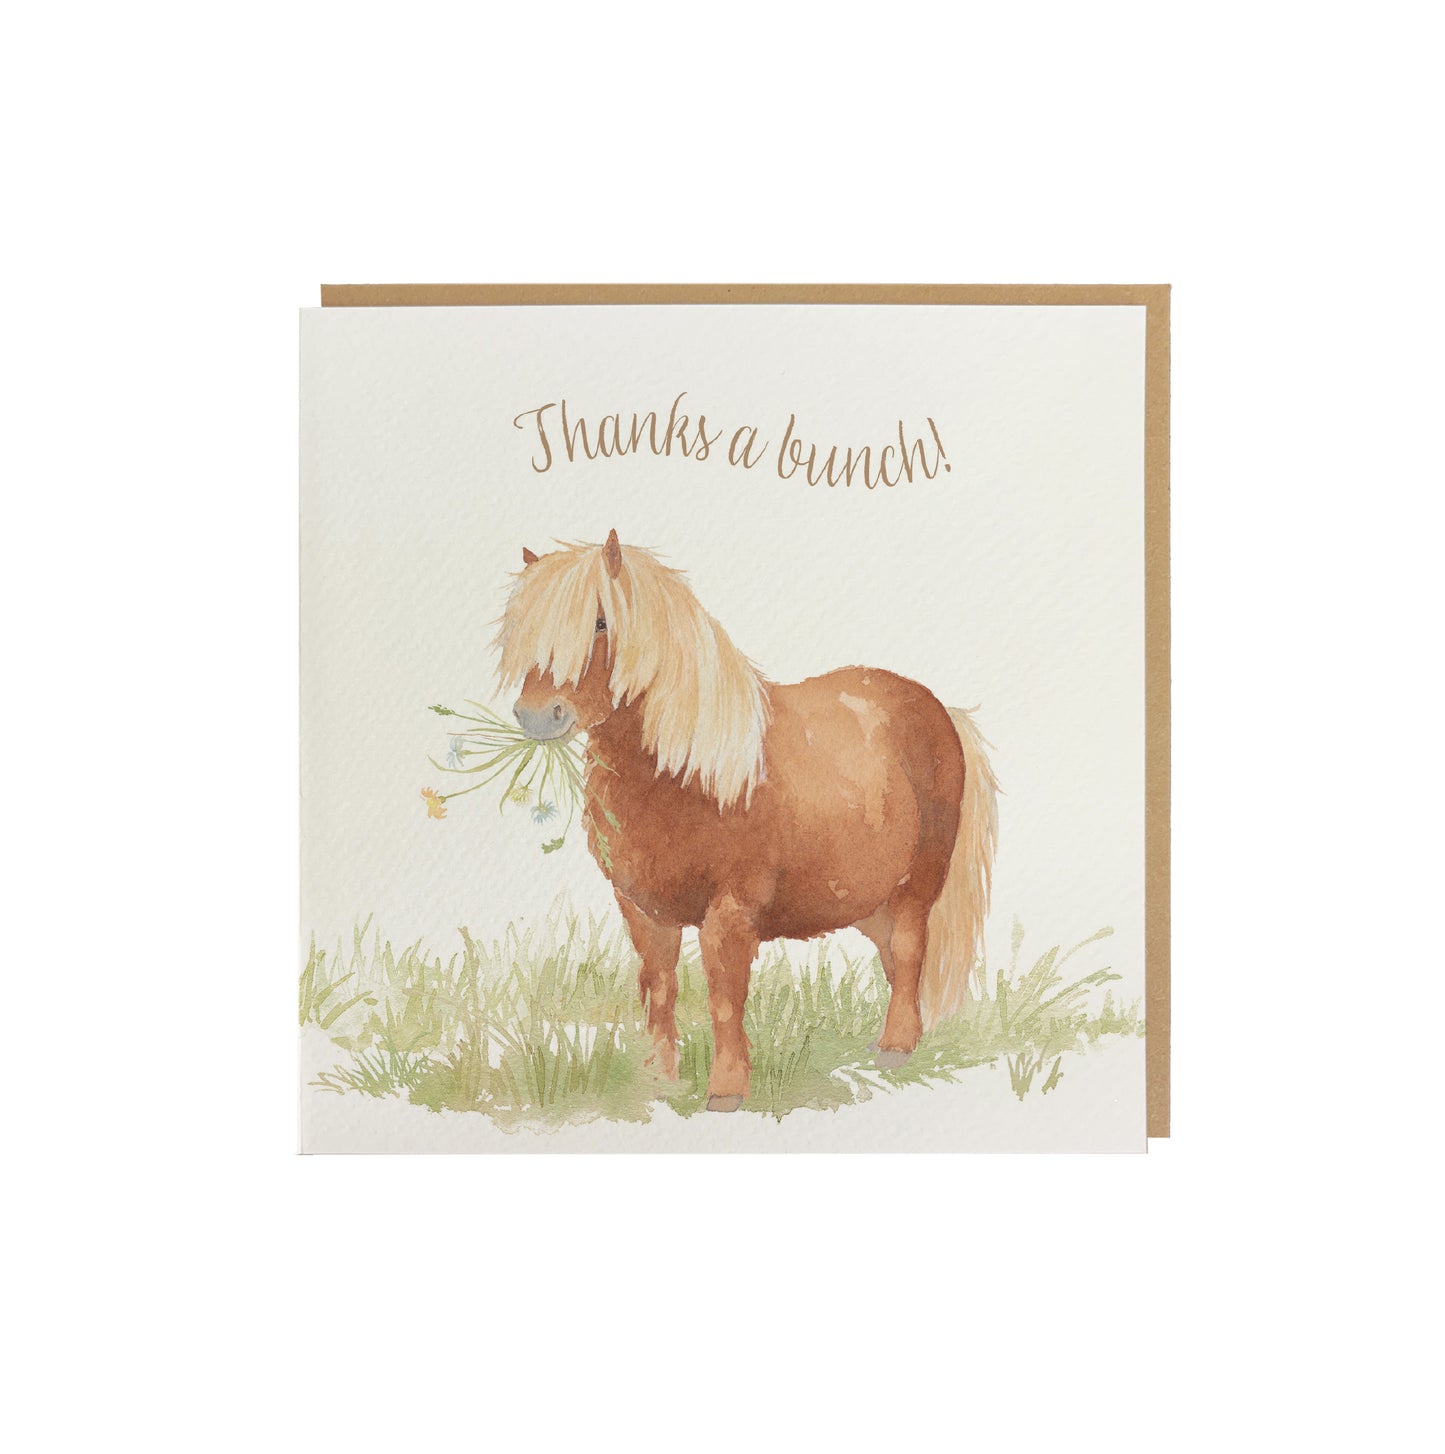 A greetings card reading Thanks a Bunch in brown text above a chestnut Shetland pony holding a bunch of flowers in a watercolour style. The card has a recyclable brown kraft envelope behind it.